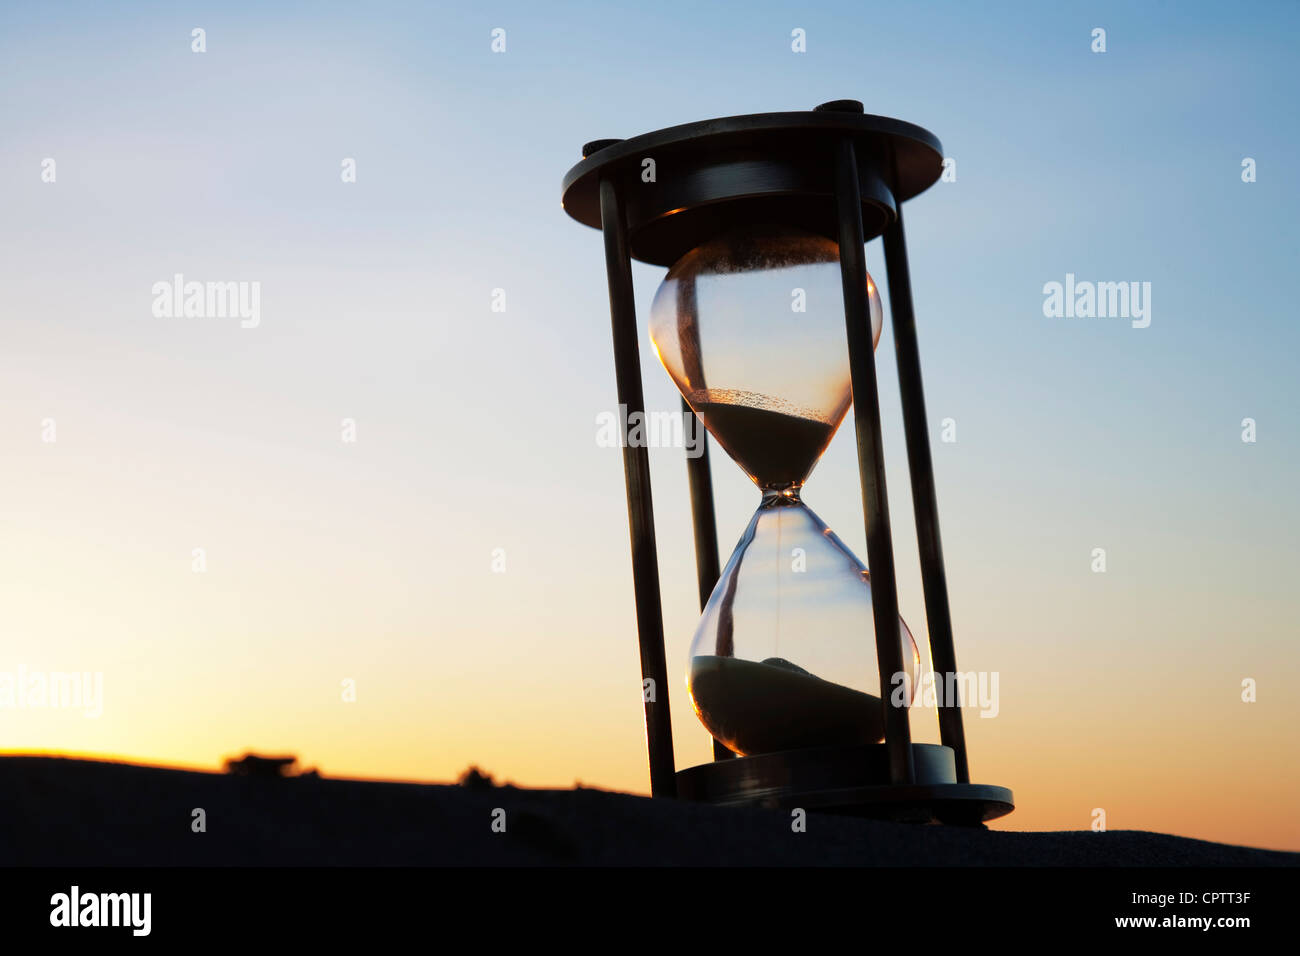 Hourglass from slightly below, outside at sunrise. Stock Photo